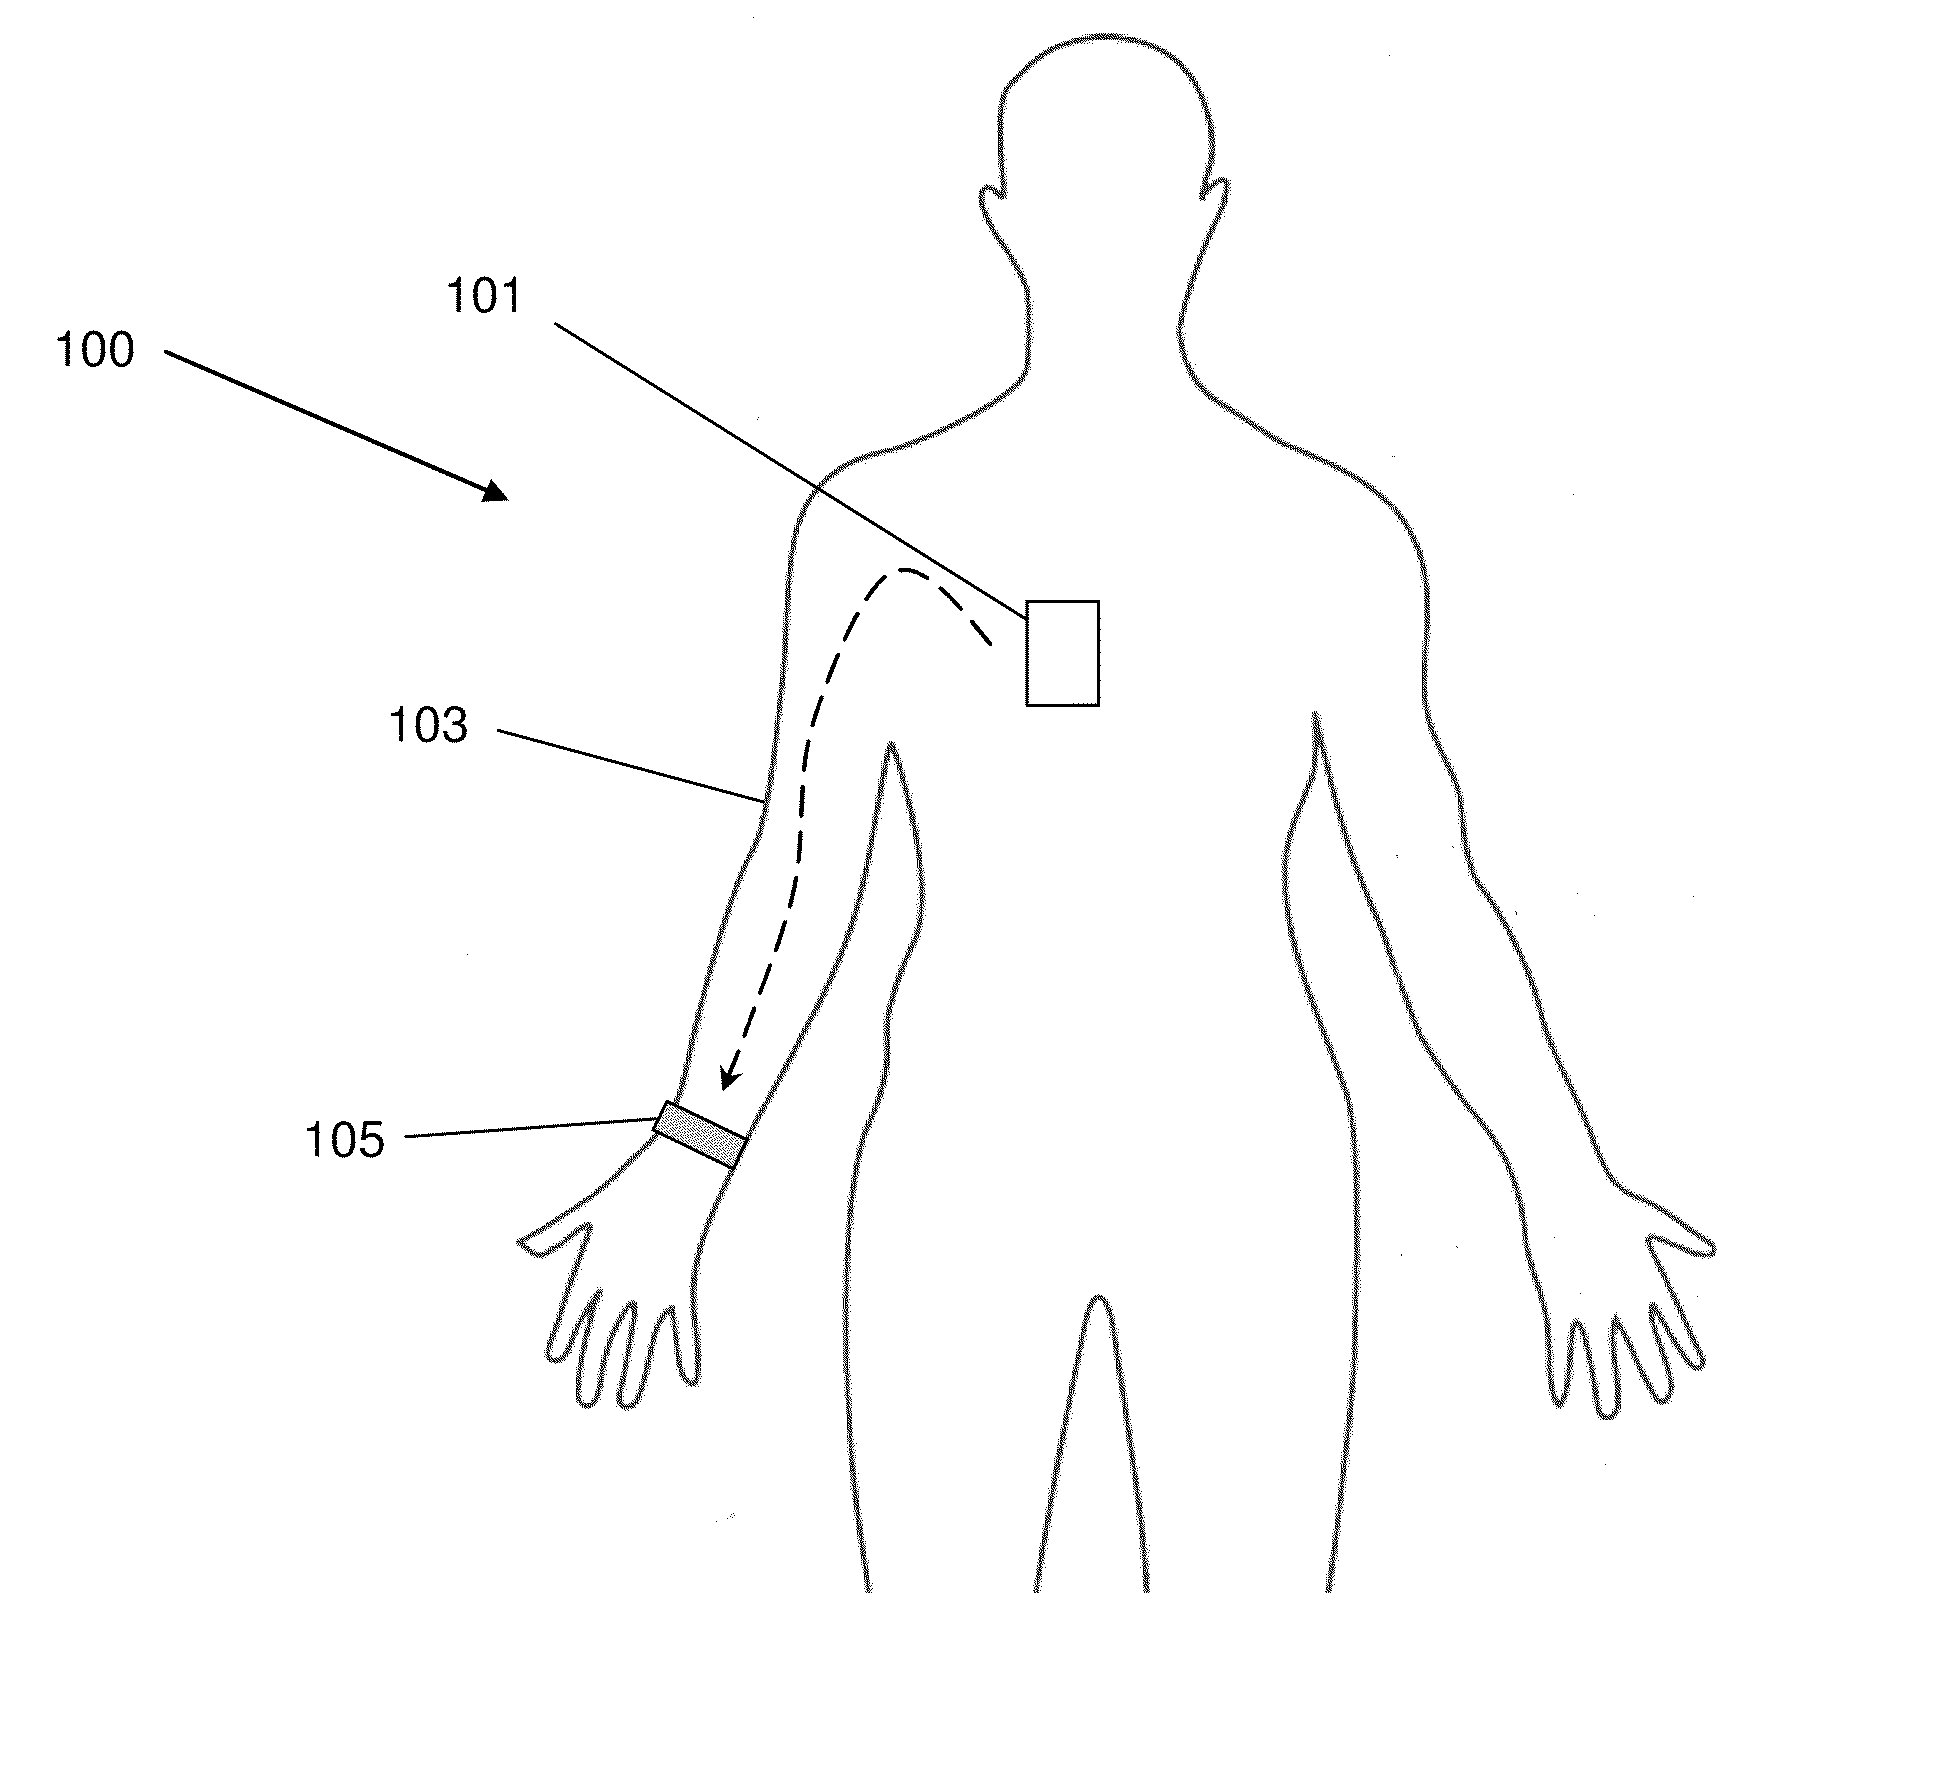 System and method for intra-body communication